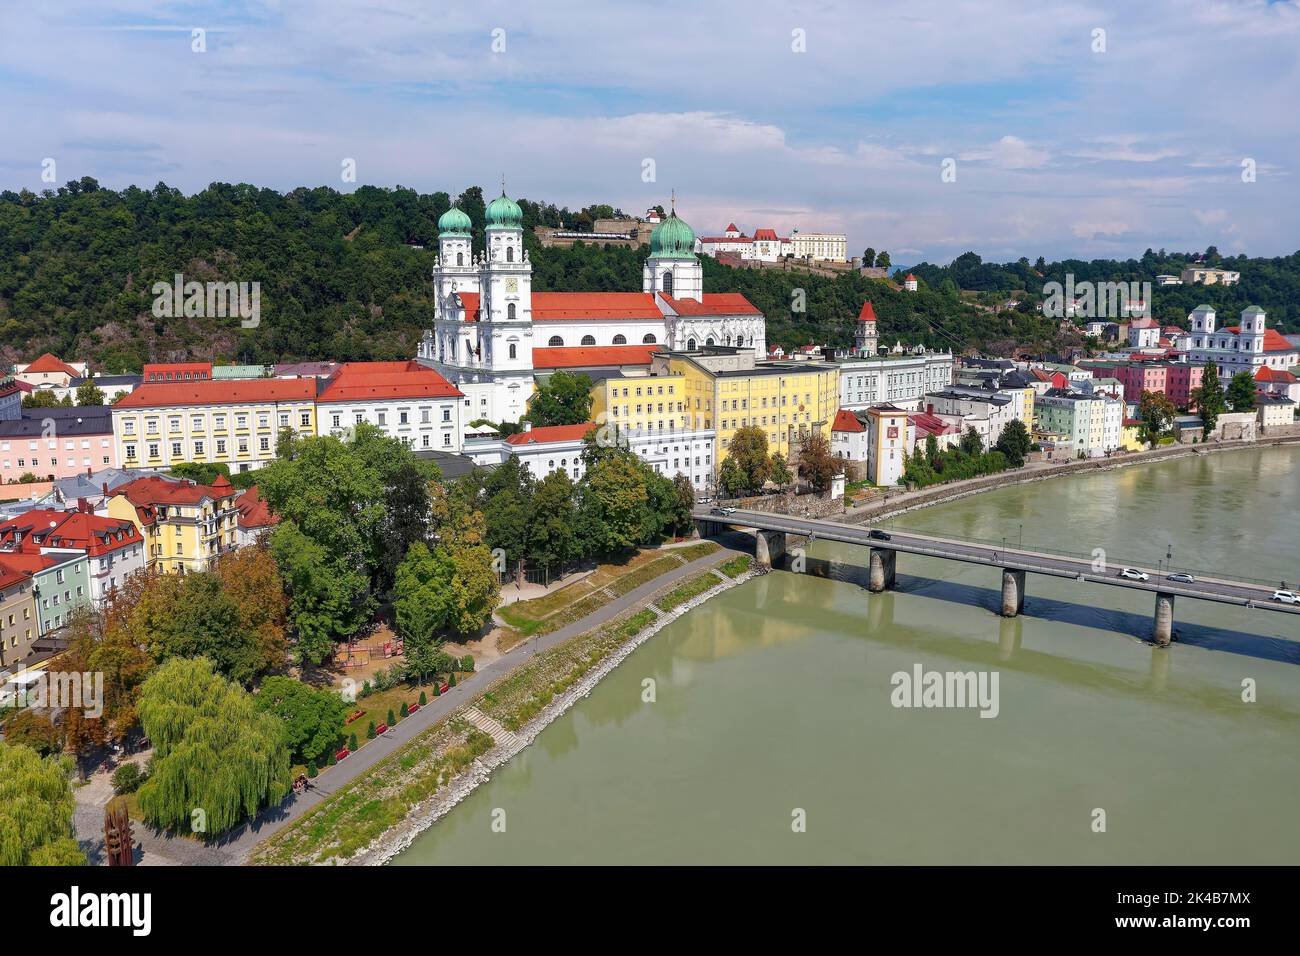 Aerial view, River Inn, Marienbruecke, St. Stephan's Cathedral, Old Town, Three Rivers City of Passau, independent university city, administrative Stock Photo